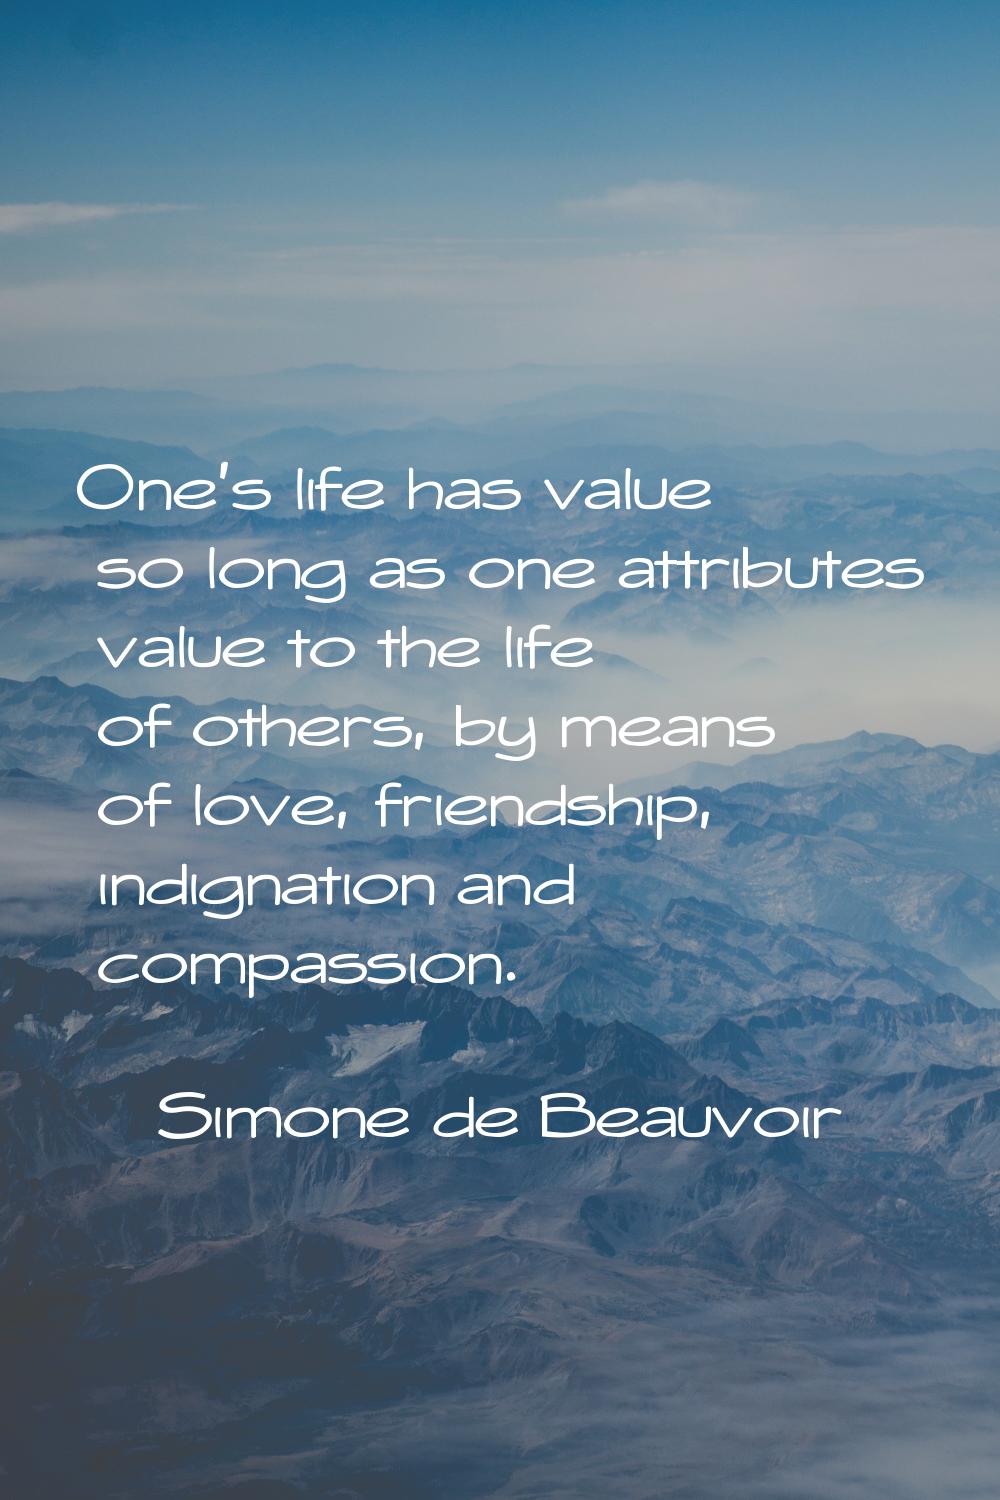 One's life has value so long as one attributes value to the life of others, by means of love, frien